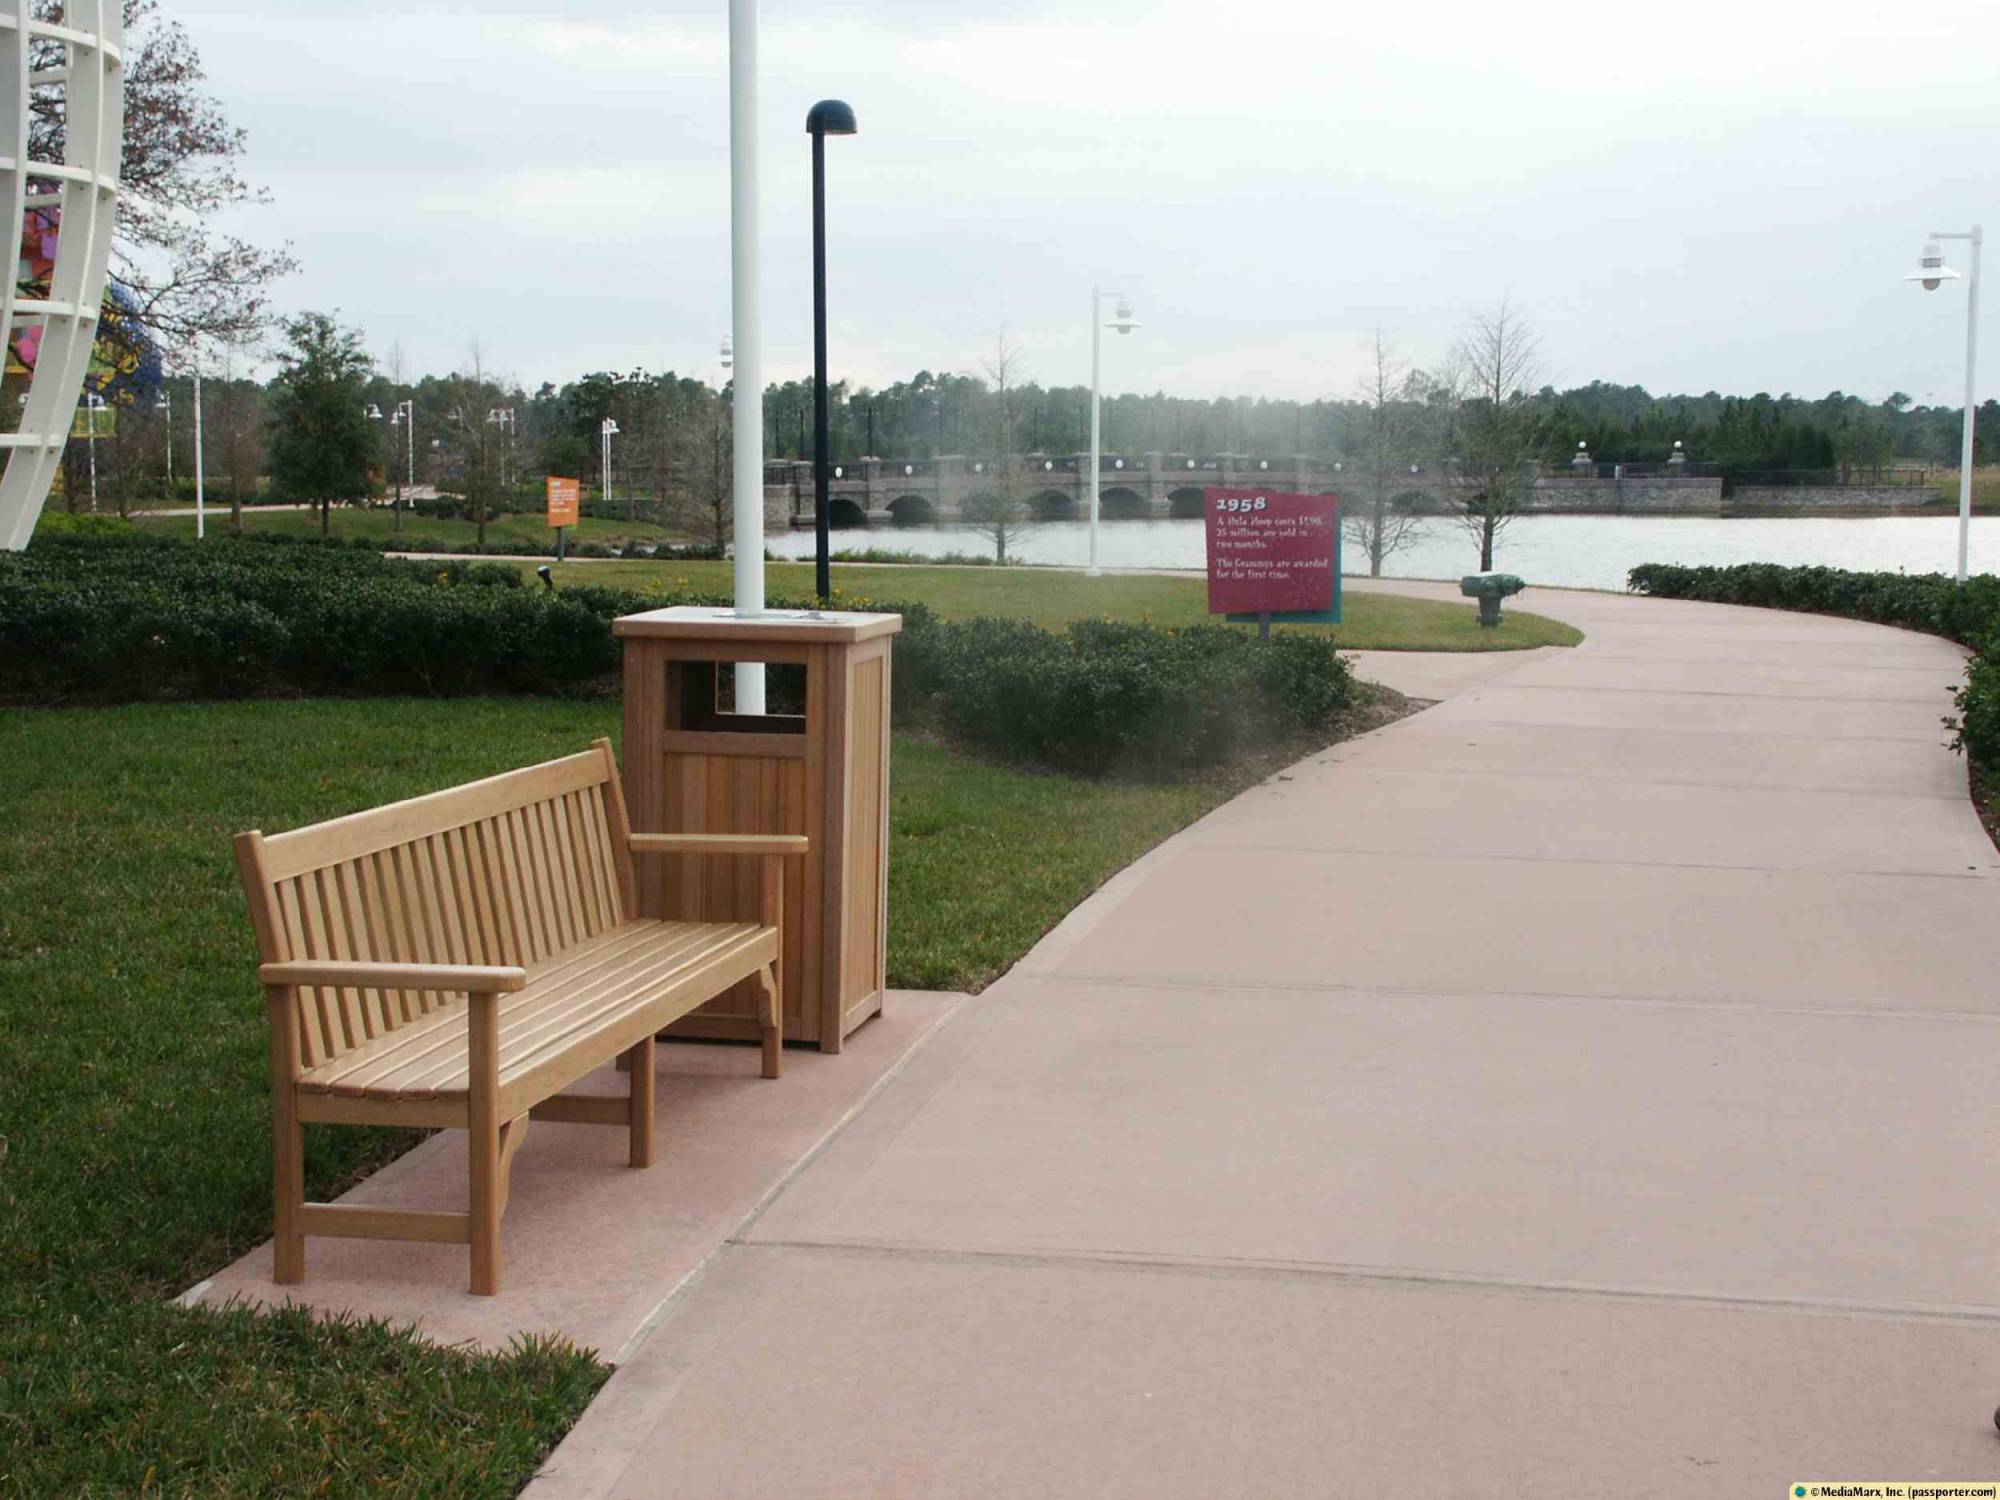 Pop Century - Walkway and Benches